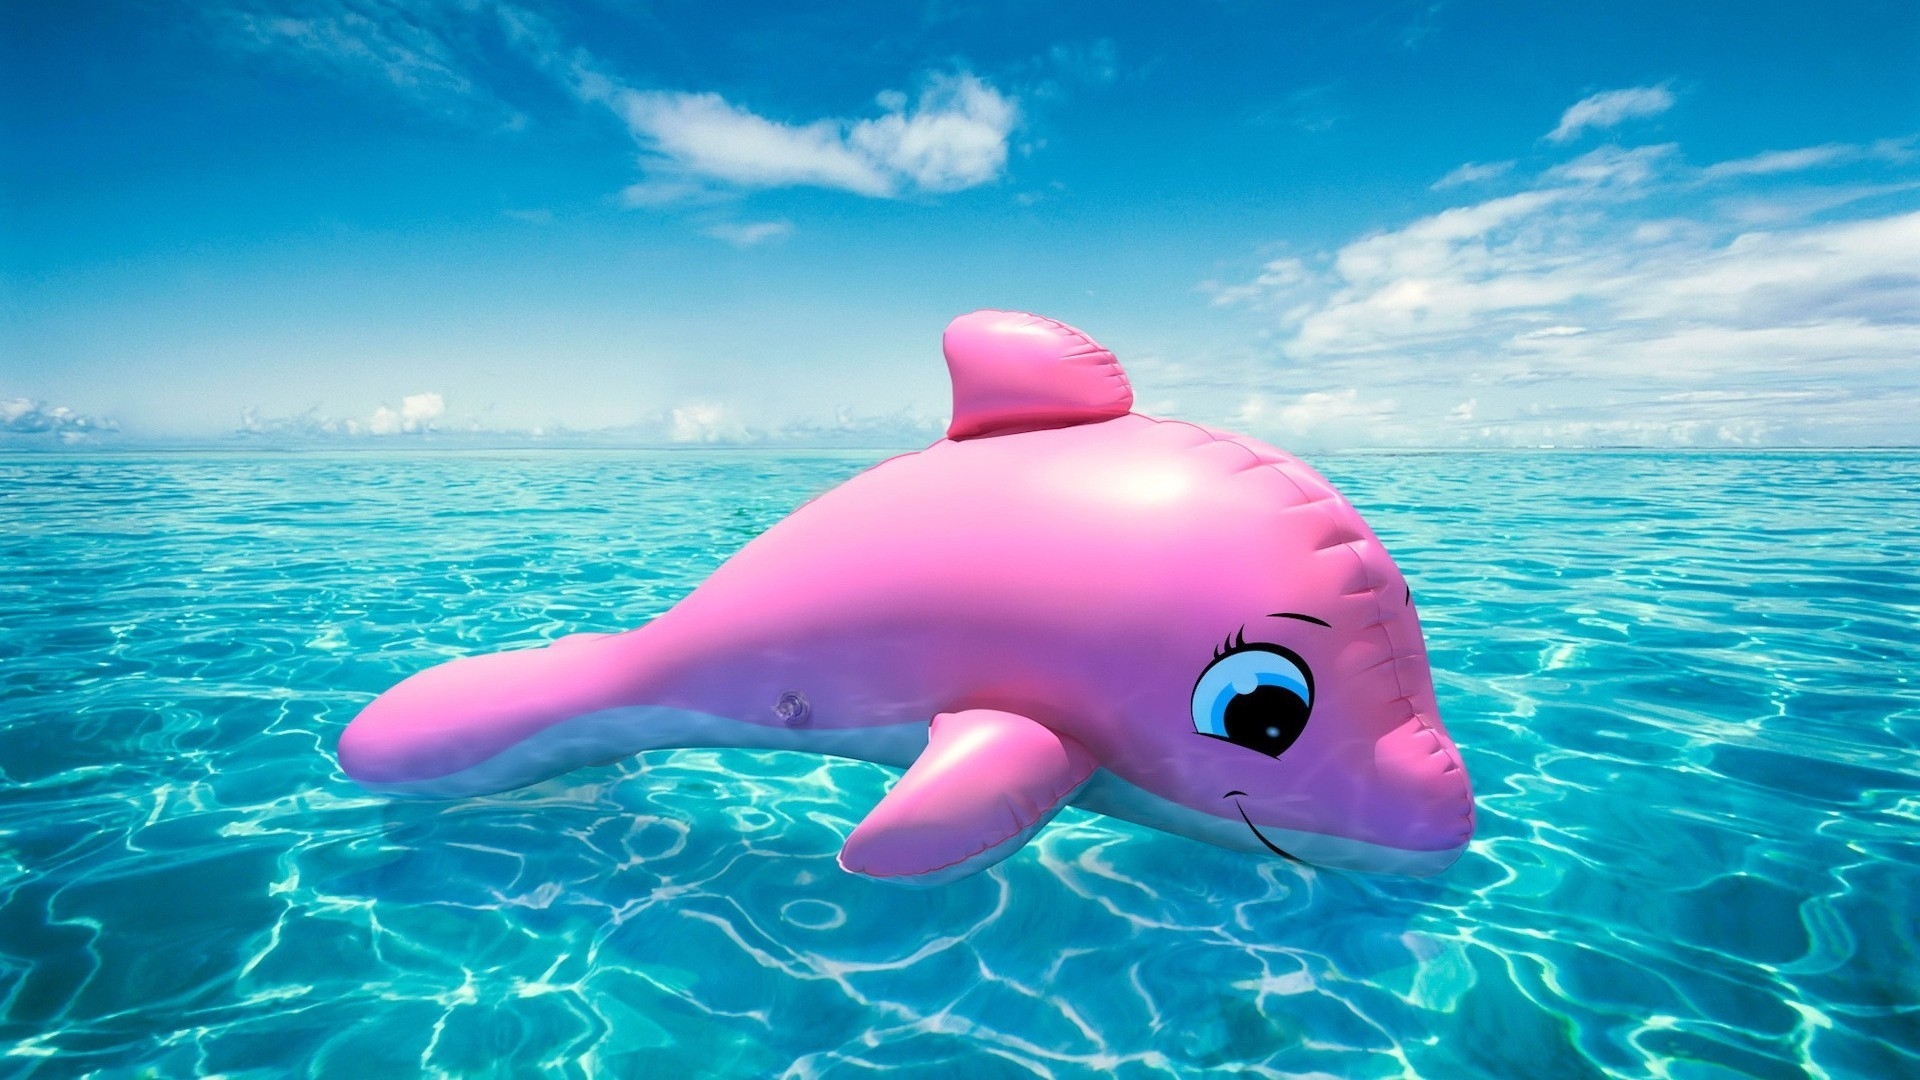 Pink Whale for 1920 x 1080 HDTV 1080p resolution